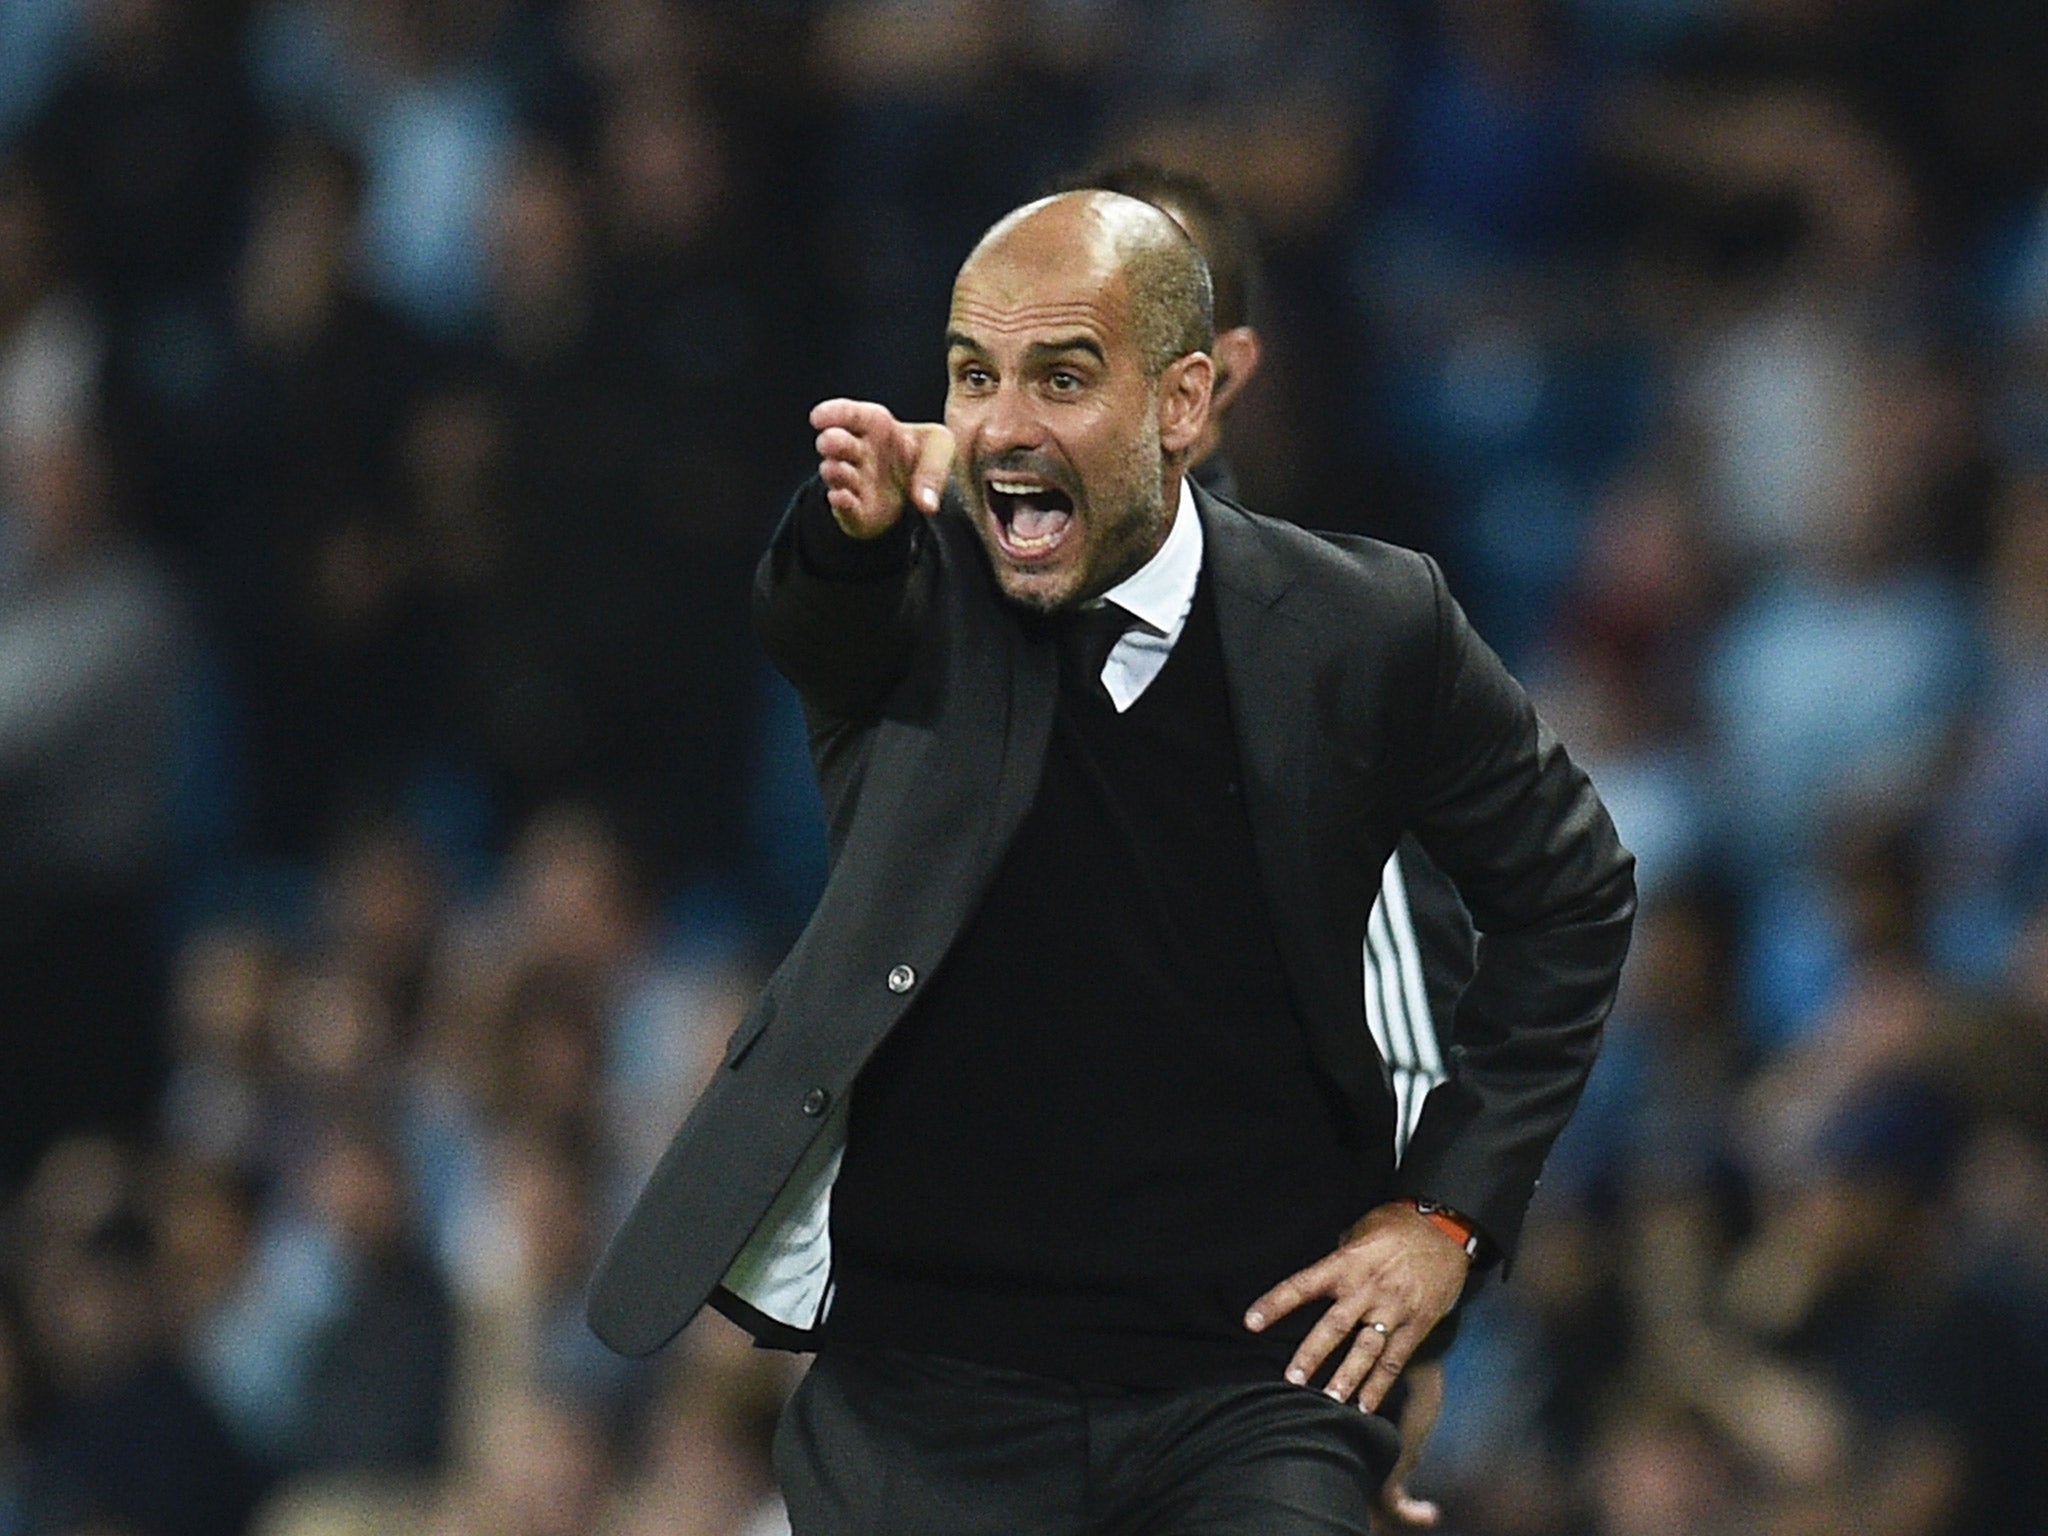 Pep Guardiola has been criticised repeatedly by Yaya Toure's agent Dimitri Seluk